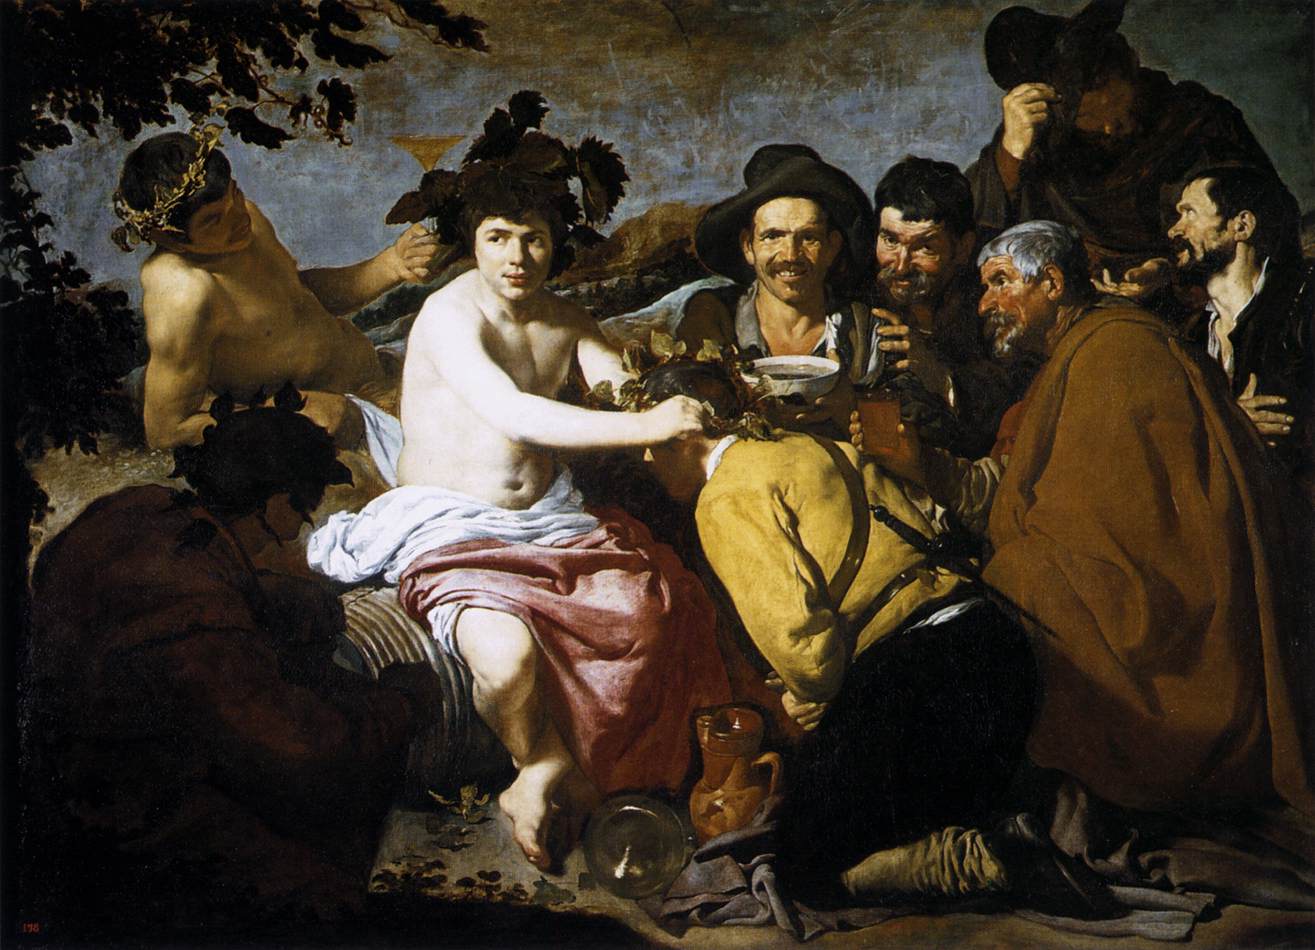 The Triumph of Bacchus (The Drunkens, the Topers)